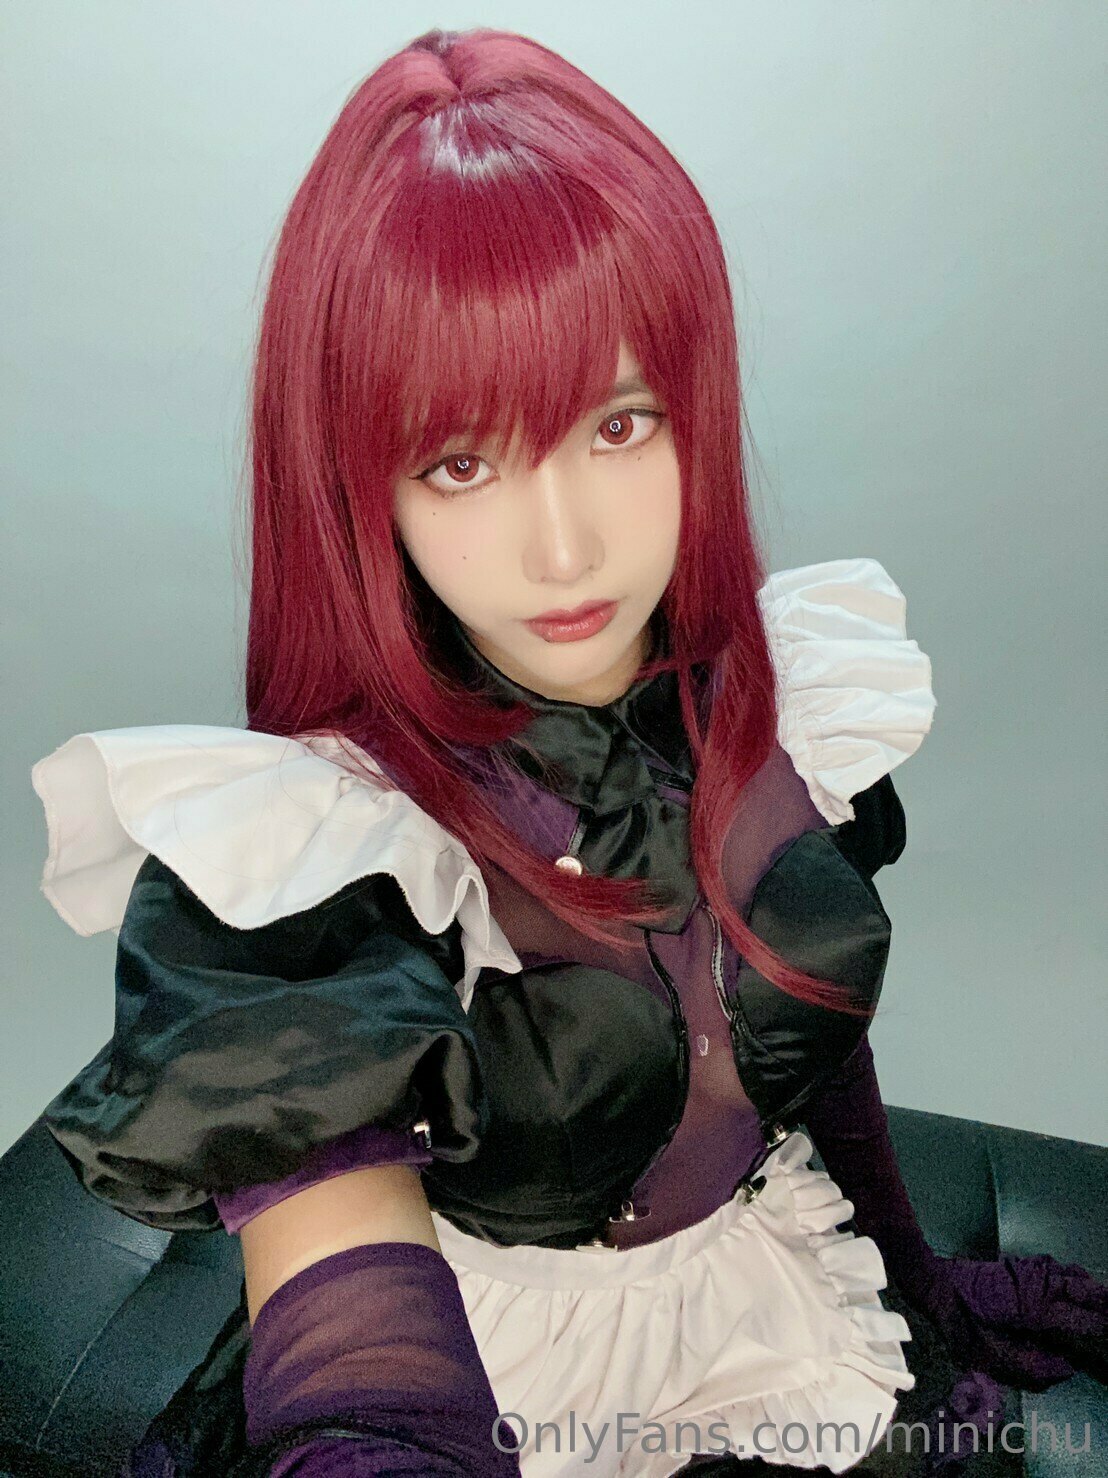 Asian model minichu package - Scathach